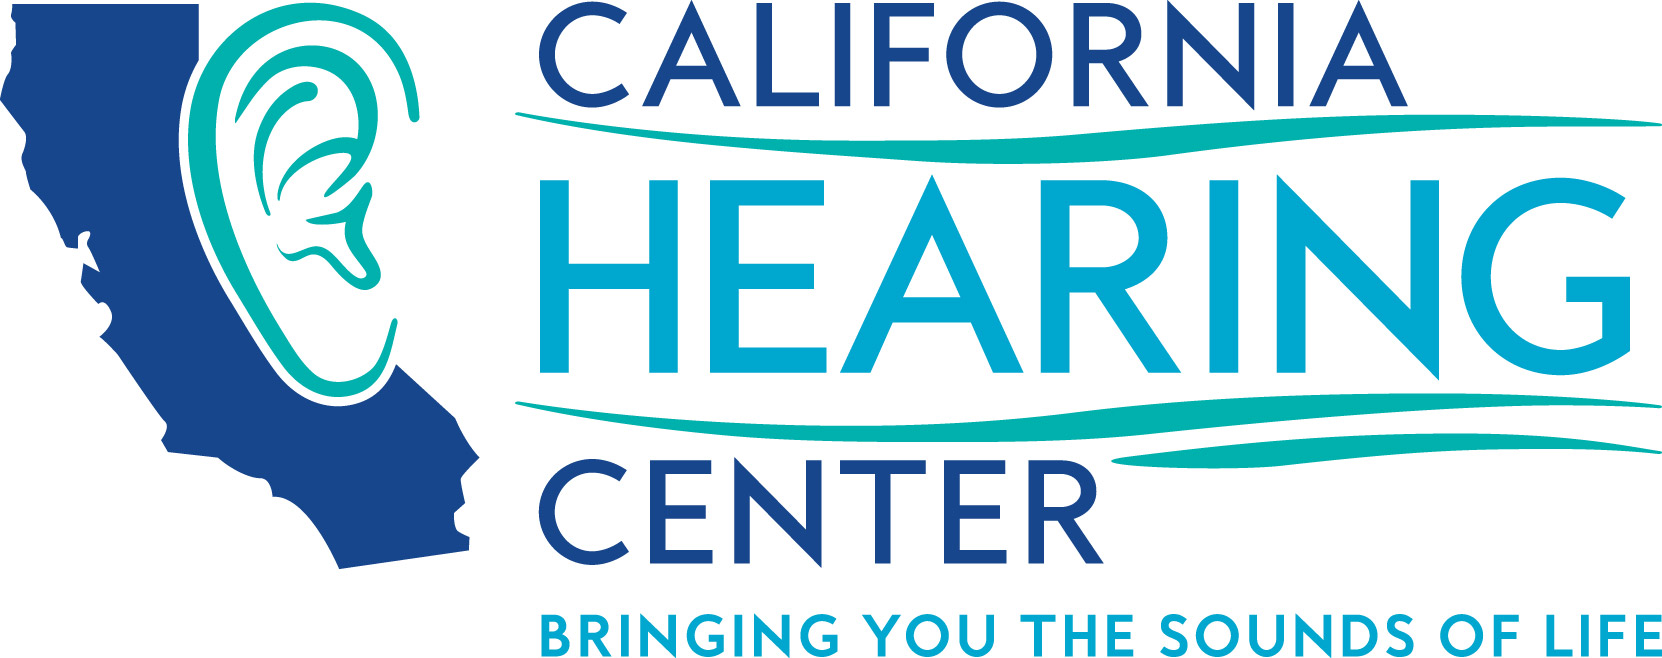 Full or part time Licensed Hearing Instrument Specialist or Audiologist